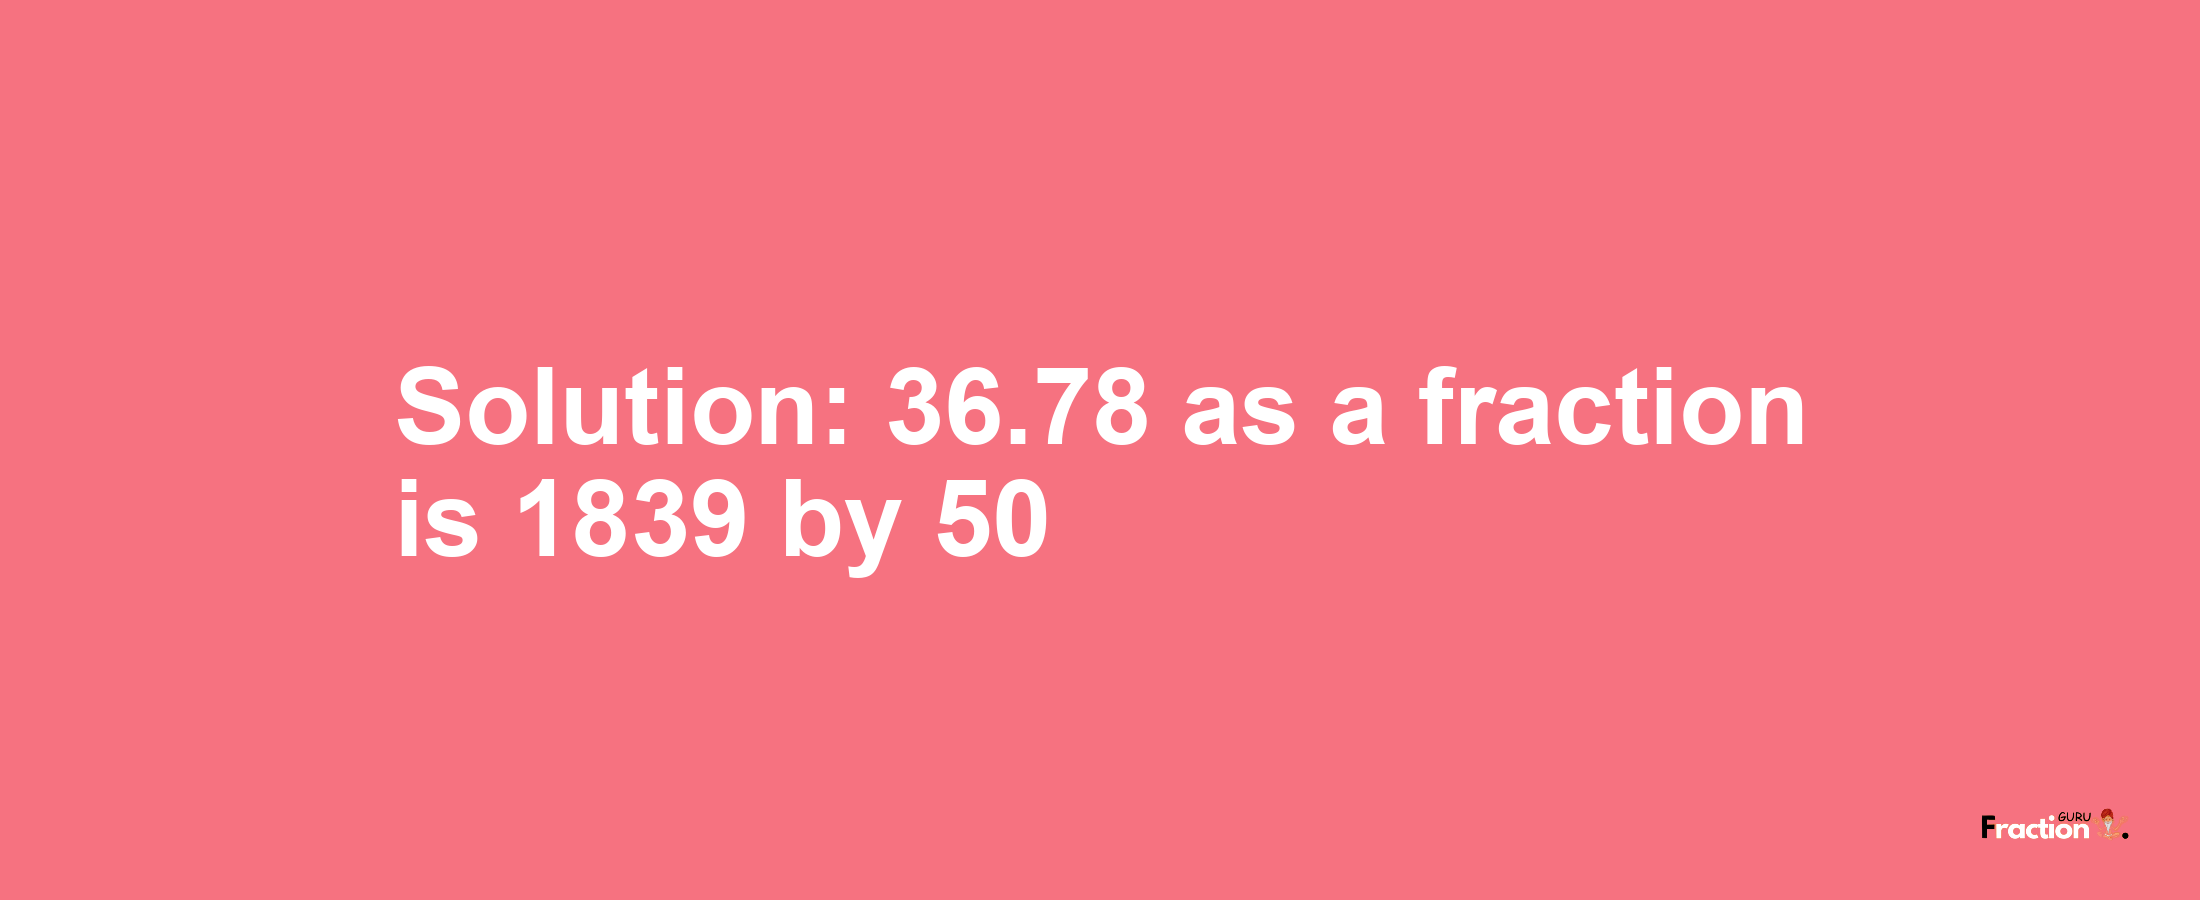 Solution:36.78 as a fraction is 1839/50